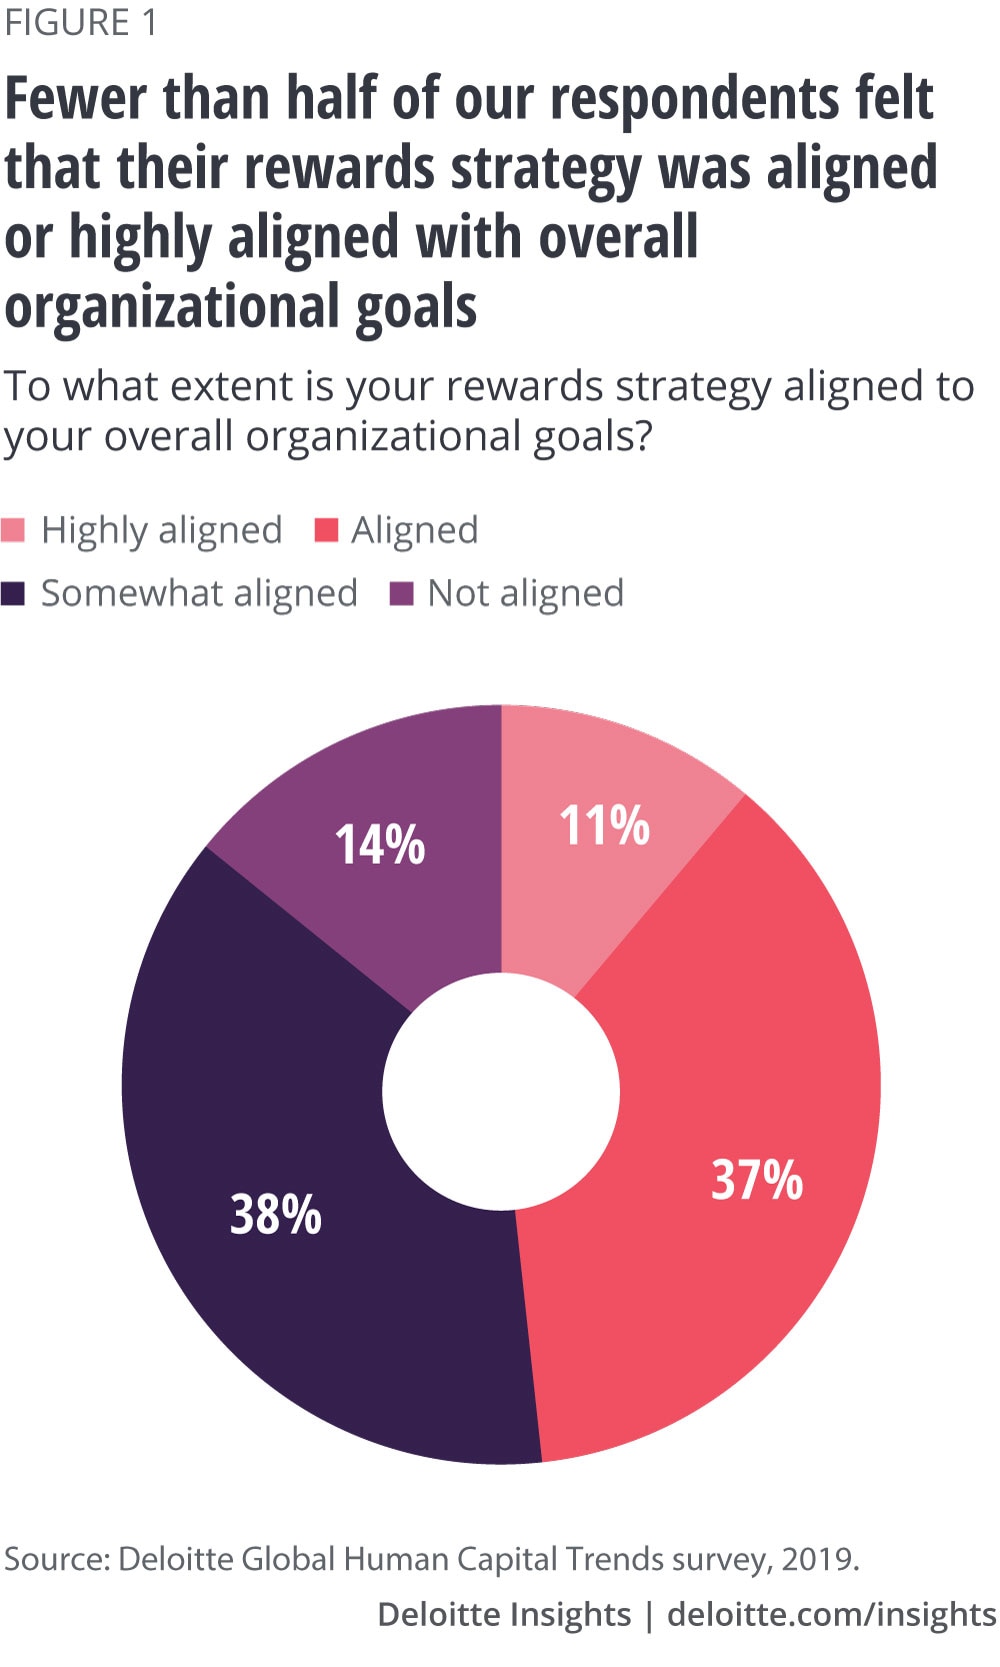 Fewer than half of our respondents felt that their rewards strategy was aligned or highly aligned with overall organization goals